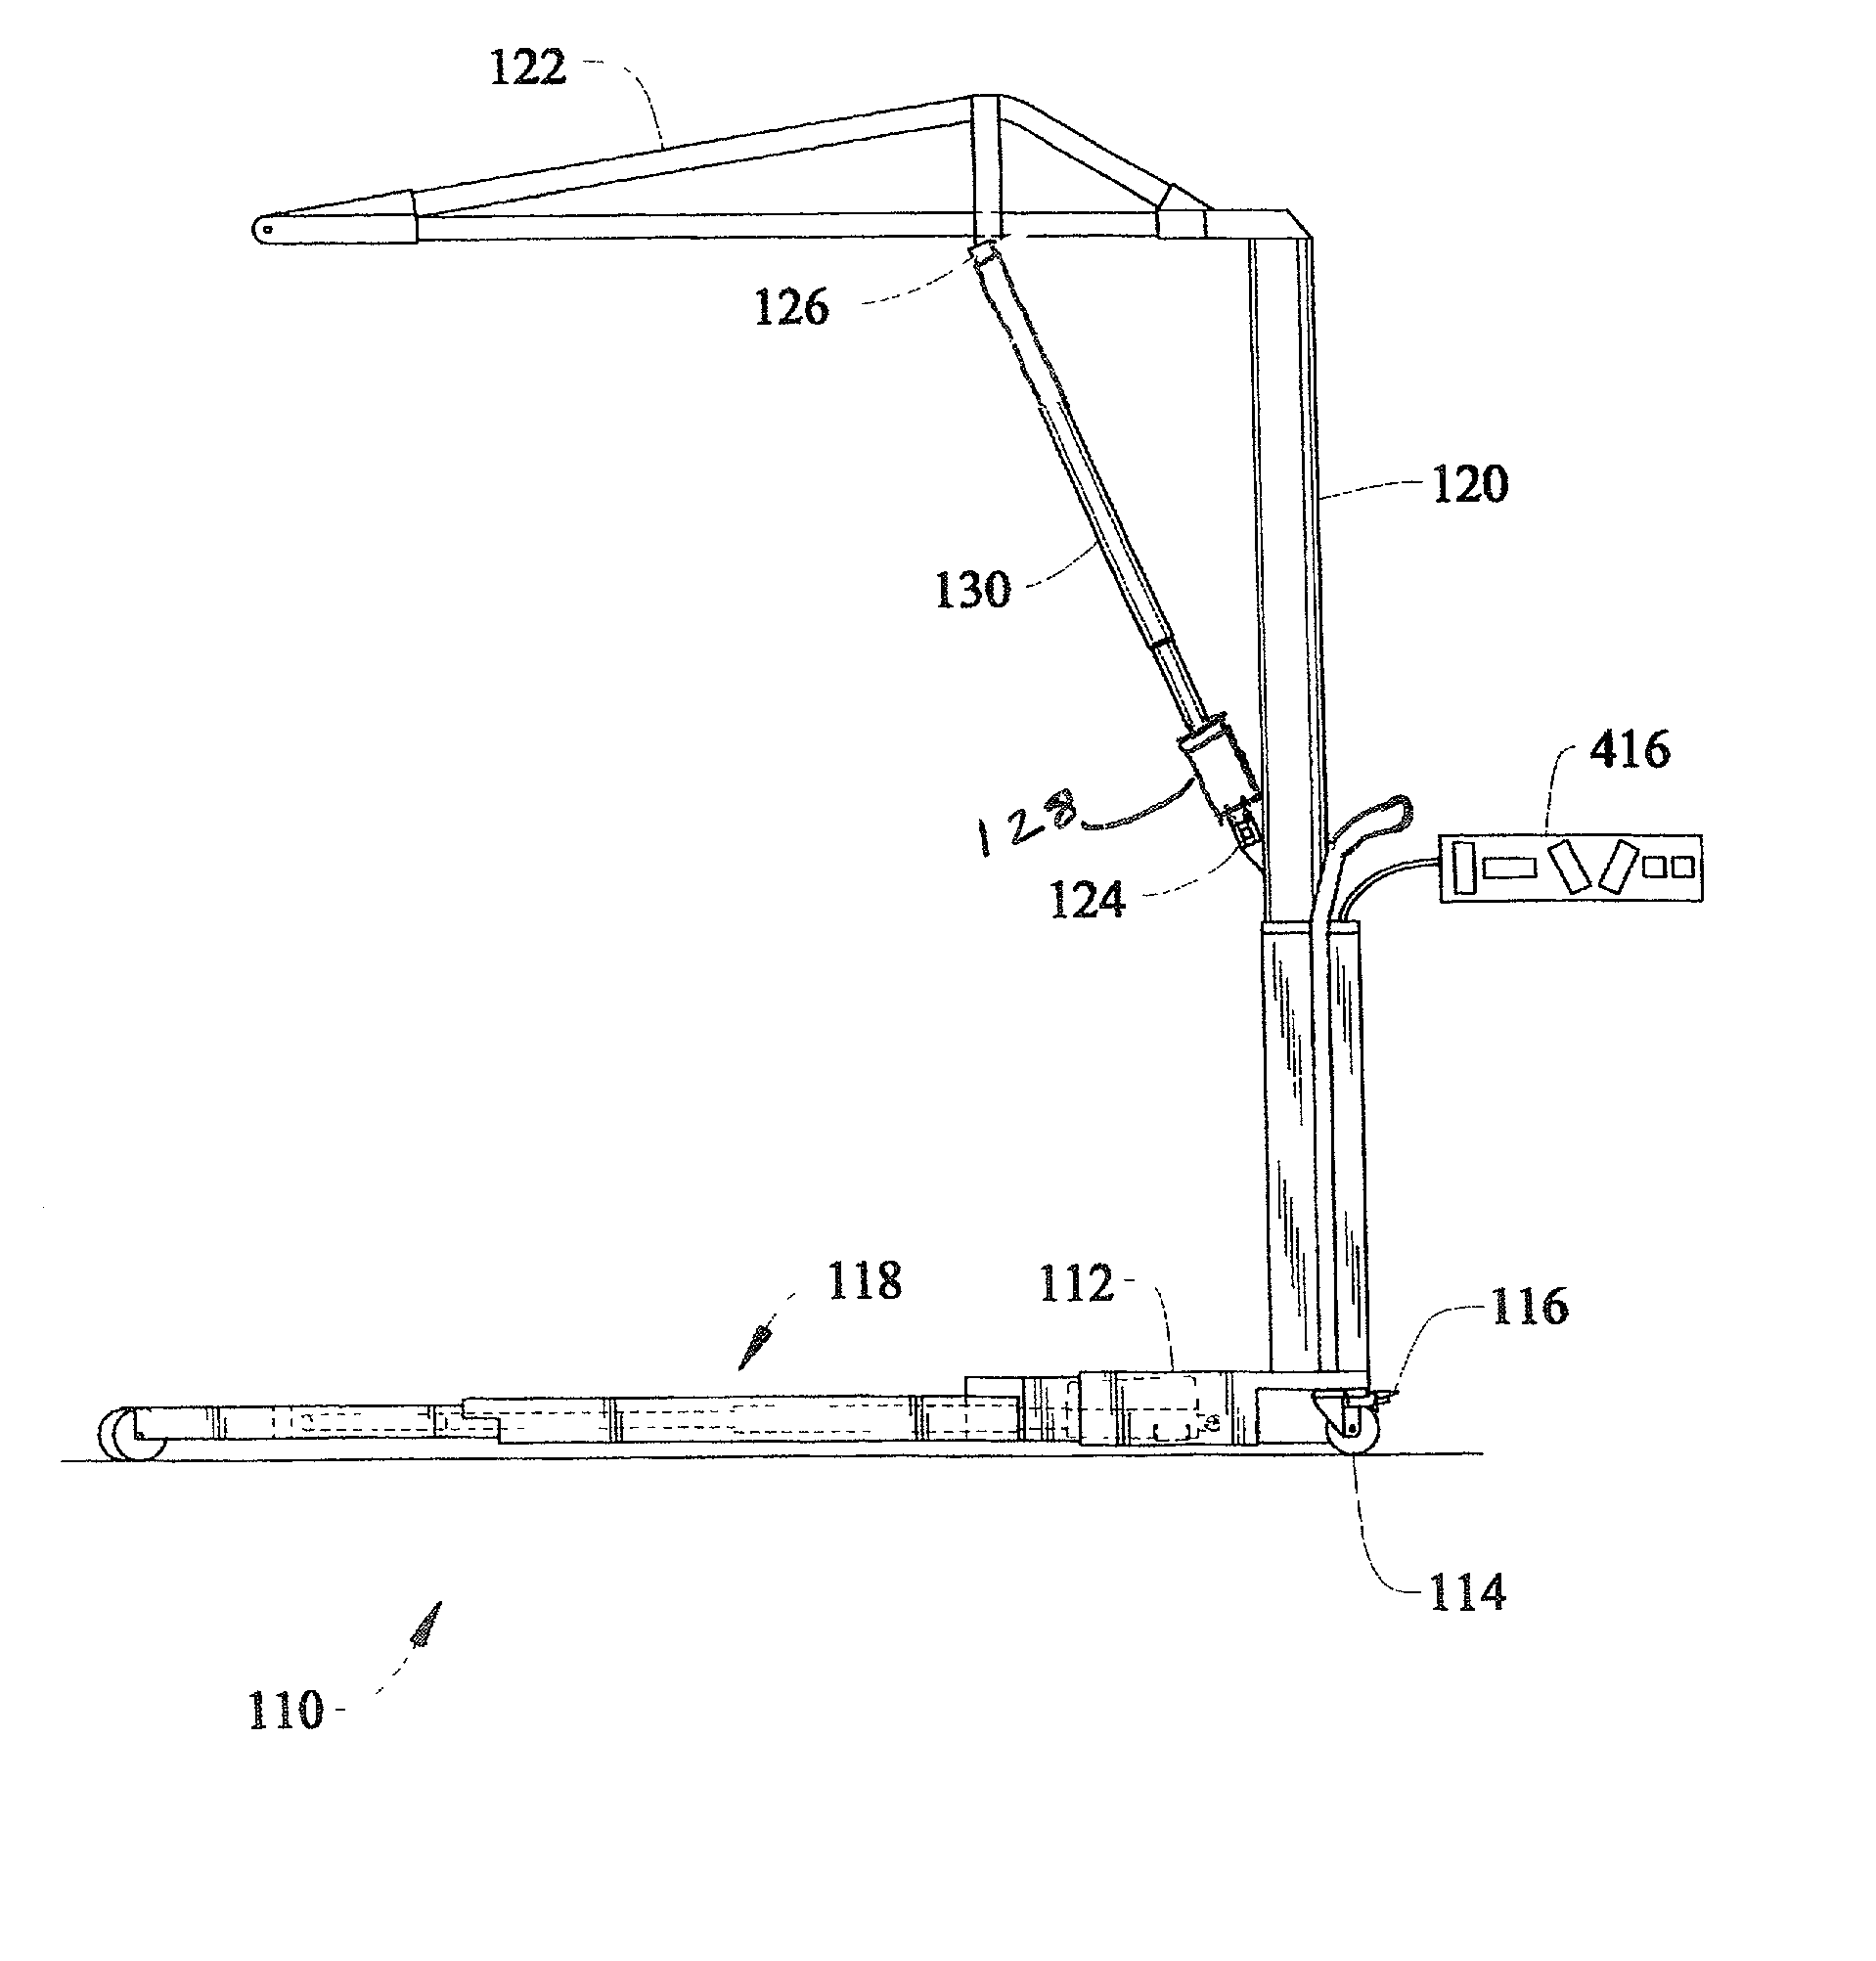 Control apparatus and control method for a storable patient lift and transfer device